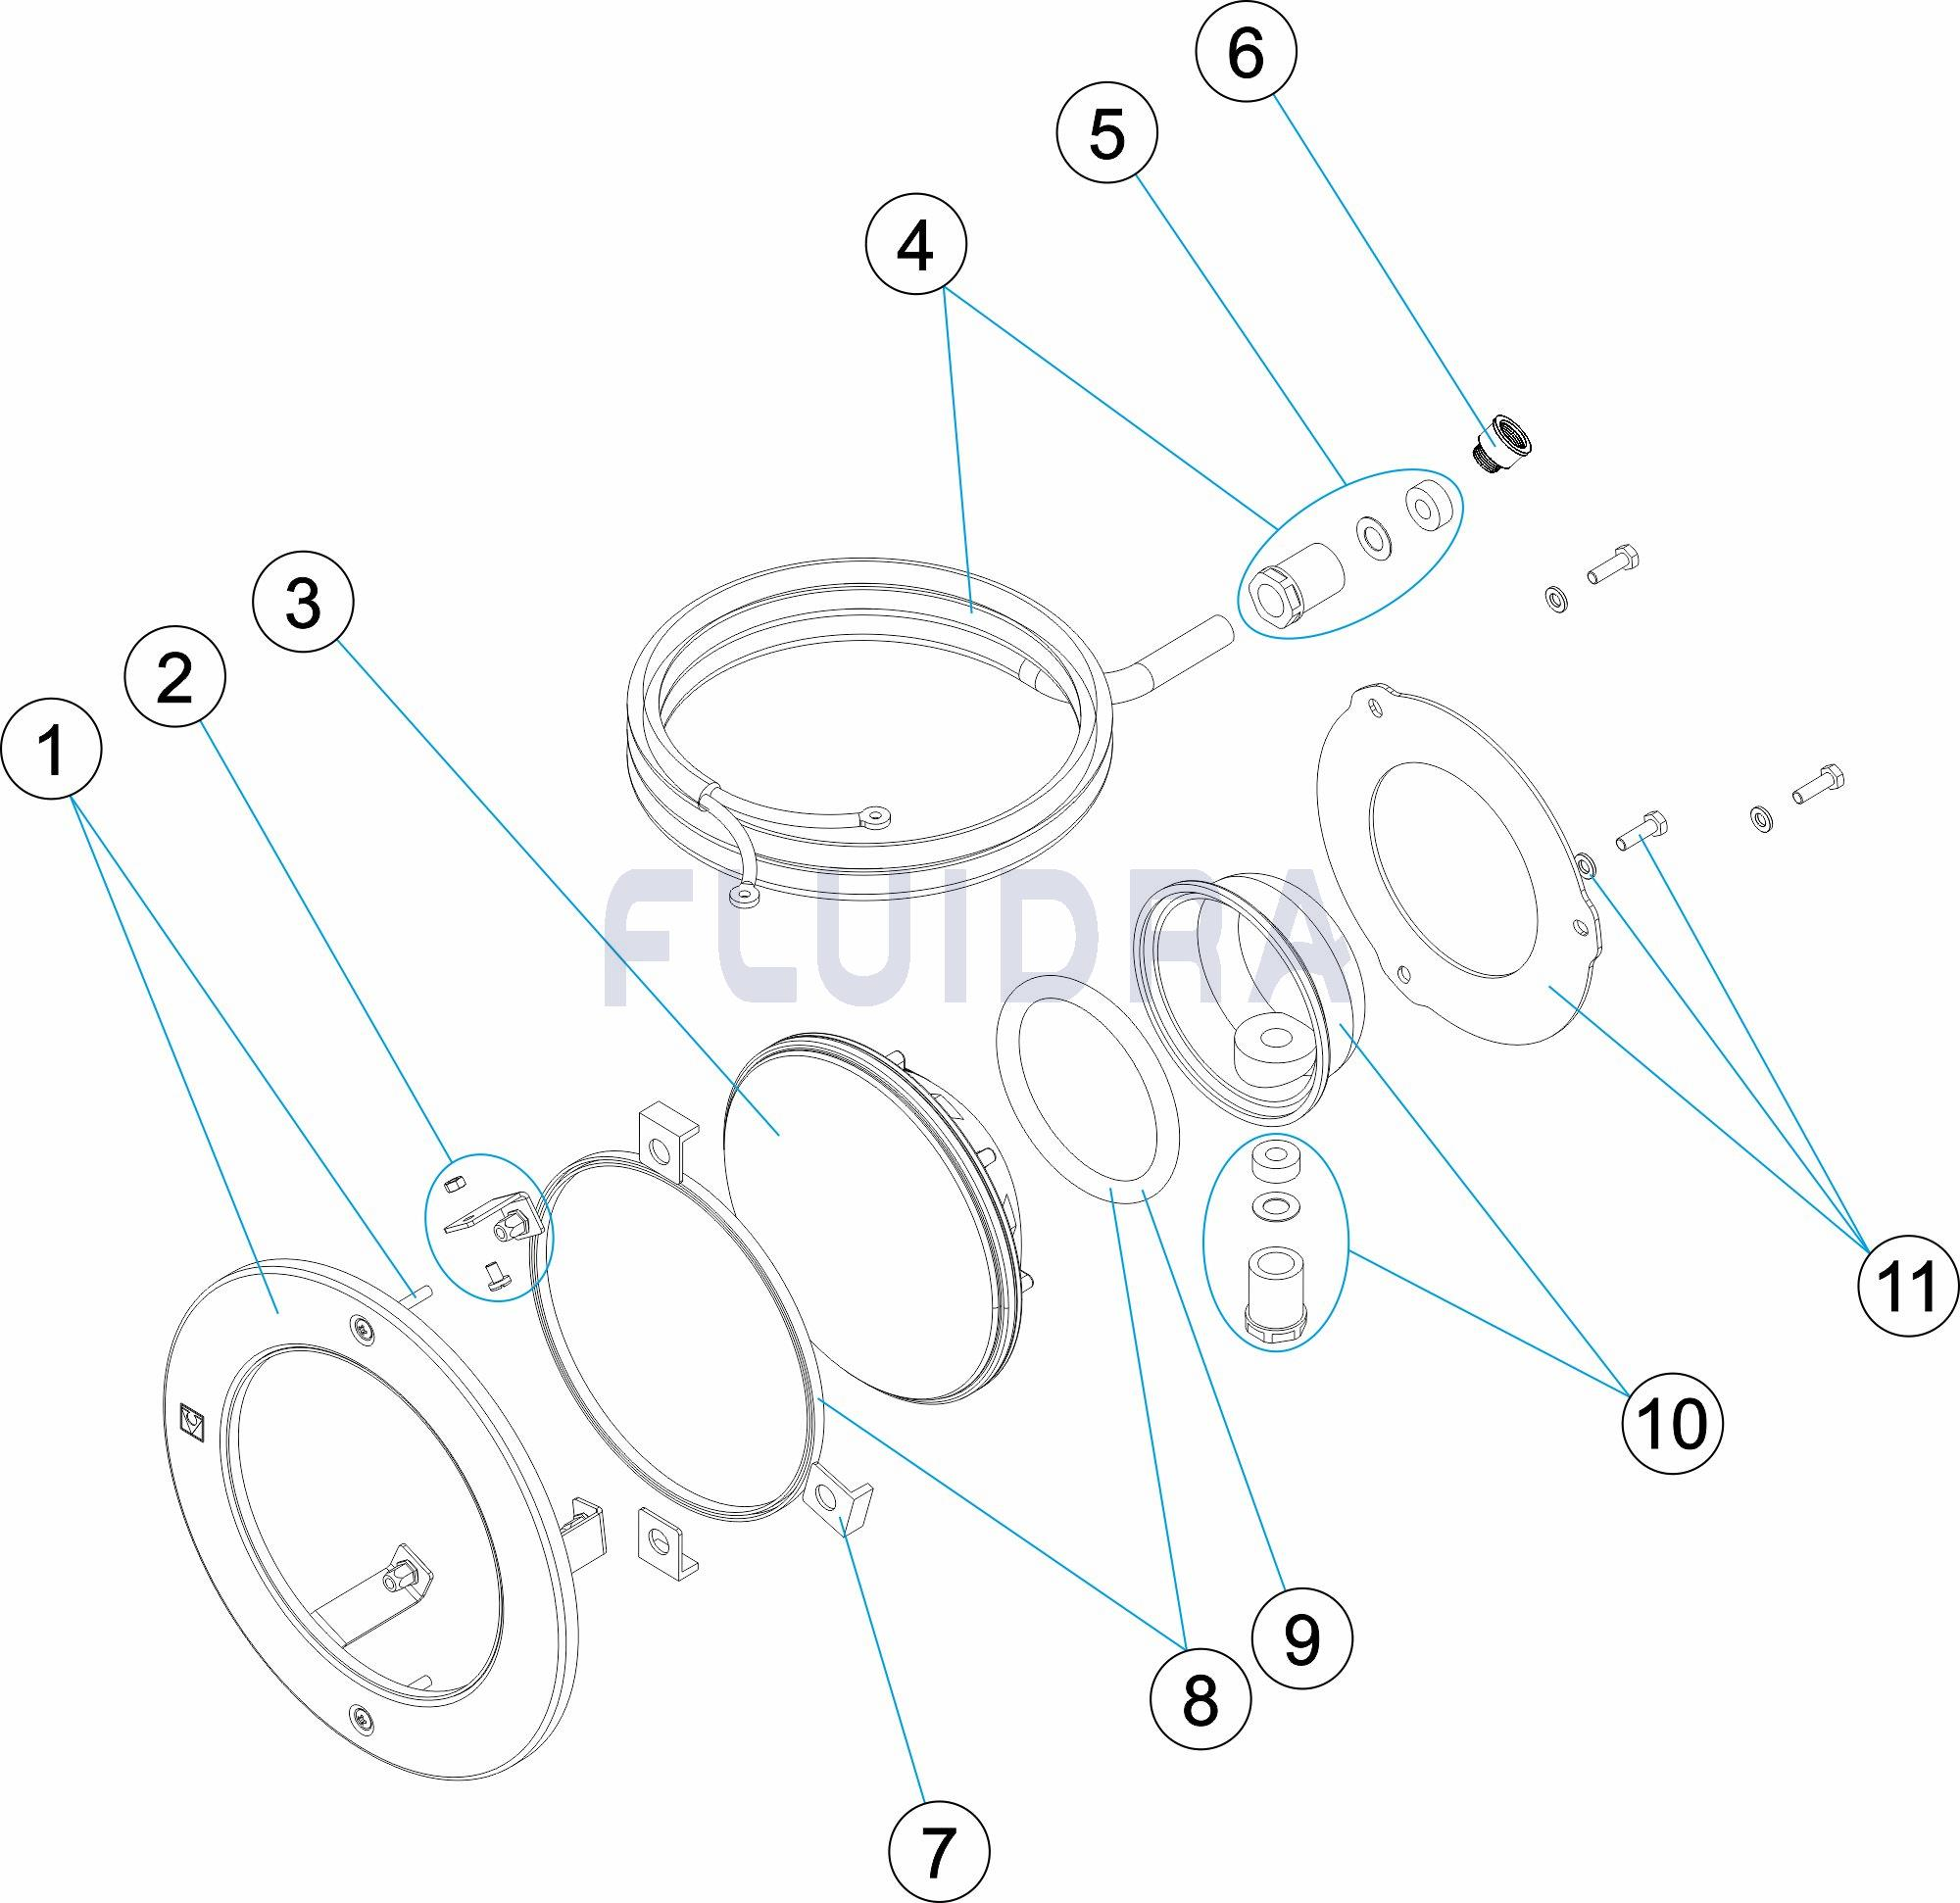 http://spareparts.astralpool.com/en/exploded-view/54096